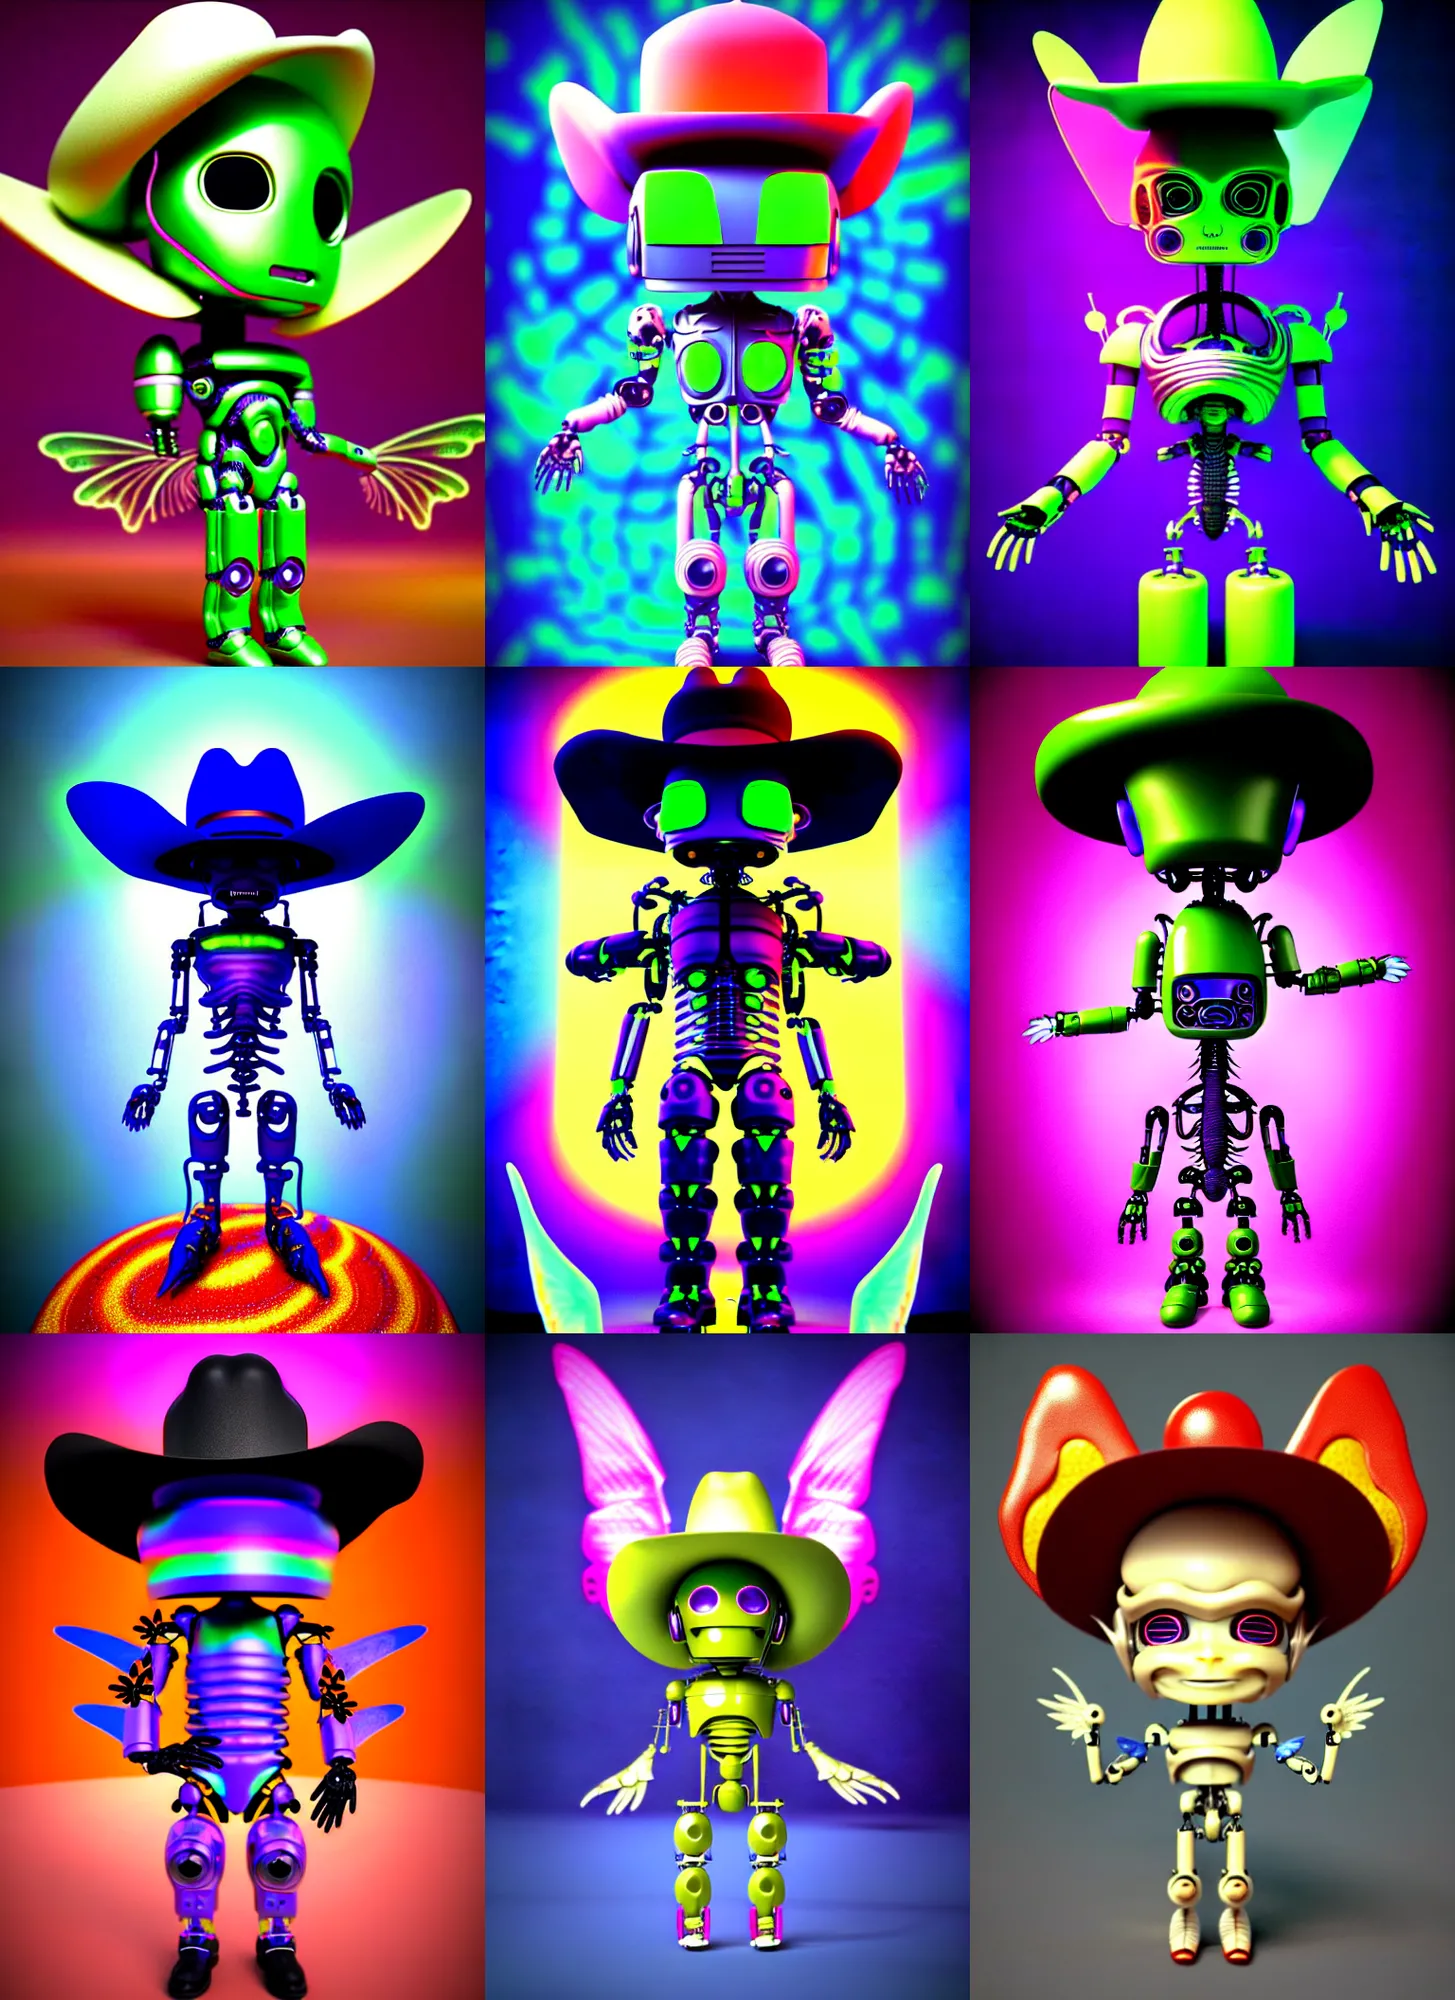 Prompt: 3 d render of chibi cyborg alien android by ichiro tanida wearing a big cowboy hat and wearing angel wings against a psychedelic swirly background with 3 d butterflies and 3 d flowers n the style of 1 9 9 0's cg graphics 3 d rendered y 2 k aesthetic by ichiro tanida, 3 do magazine